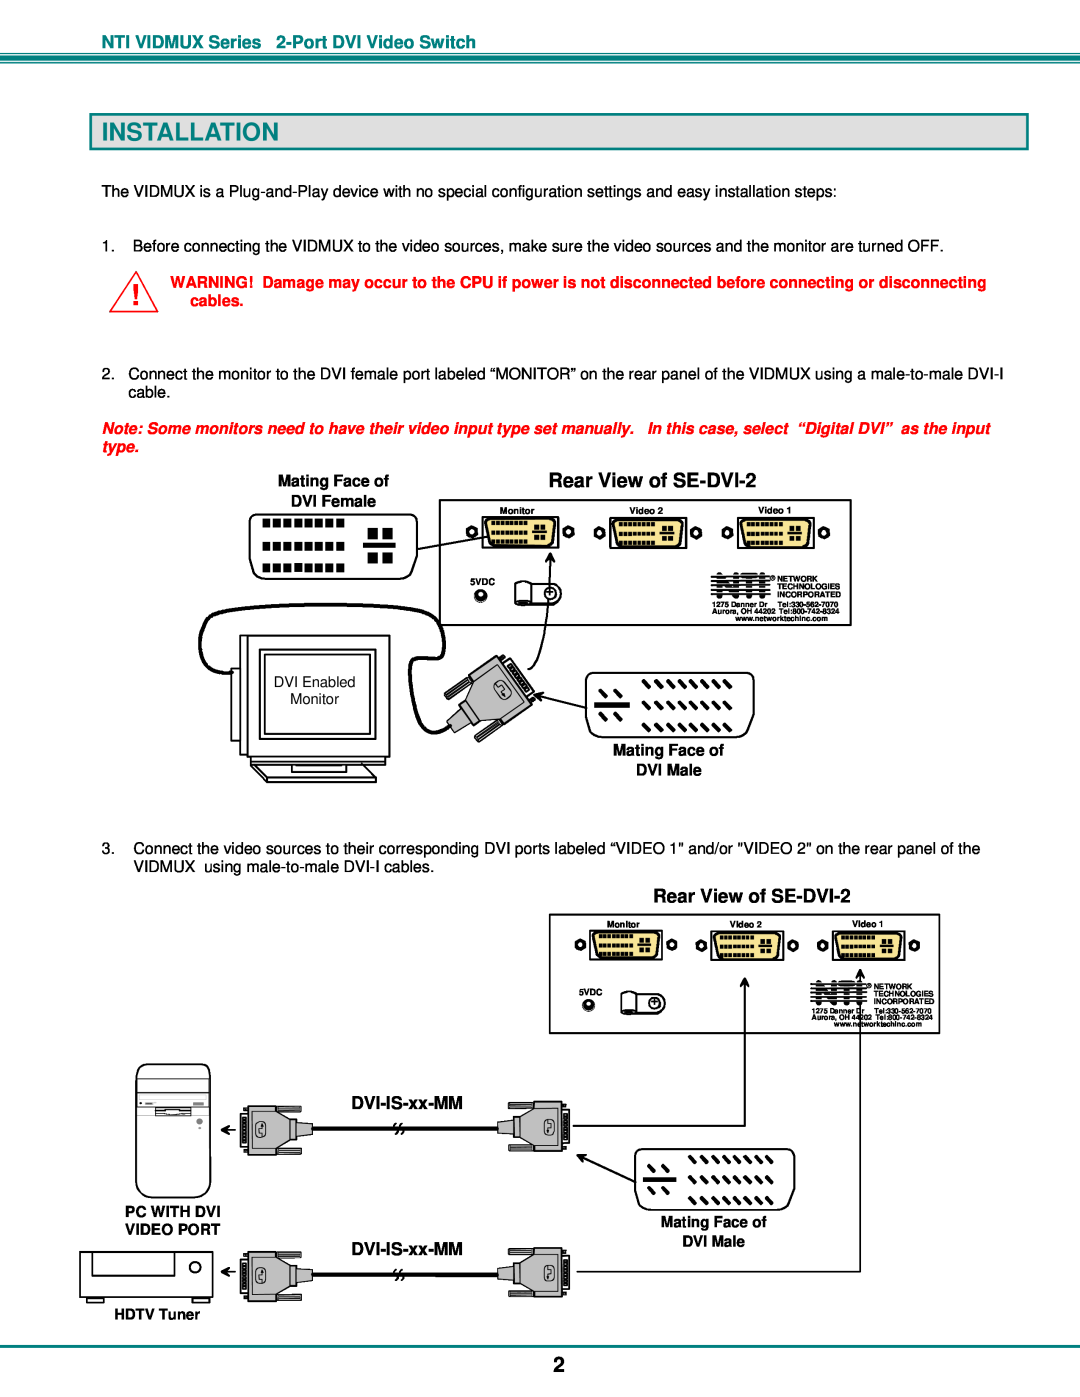 Network Technologies operation manual Installation, Rear View of SE-DVI-2, DVI-IS-xx-MM, Mating Face of, DVI Female 